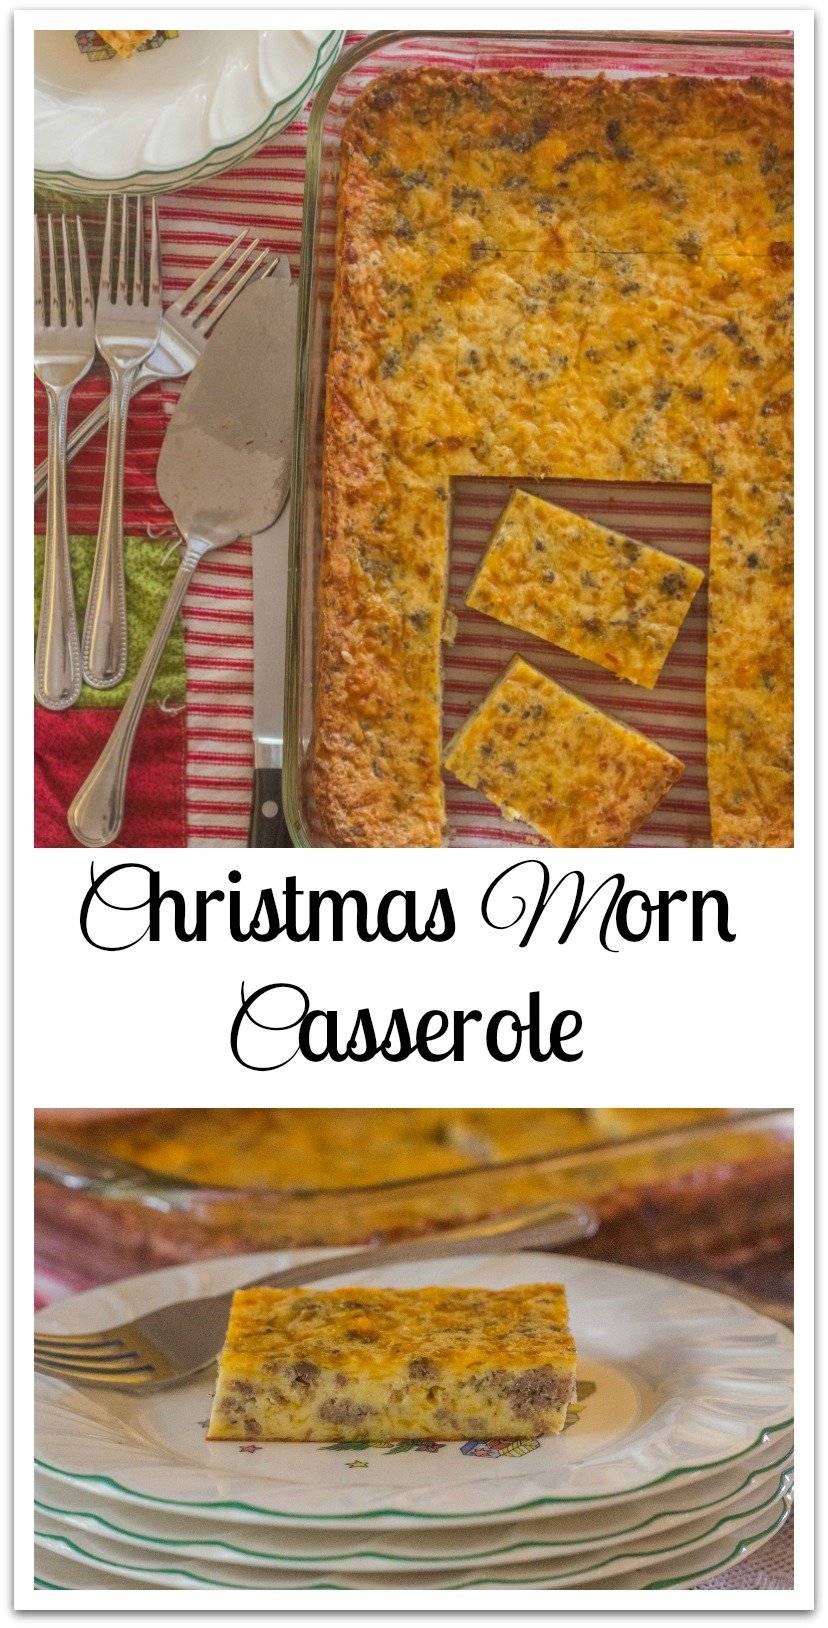 Christmas Morn Casserole is an egg, cheese, and sausage casserole that you make ahead and store in the fridge overnight. In the morning, simply bake it. No stress Christmas morning breakfast. #Christmas #Breakfast #SouthernCasserole